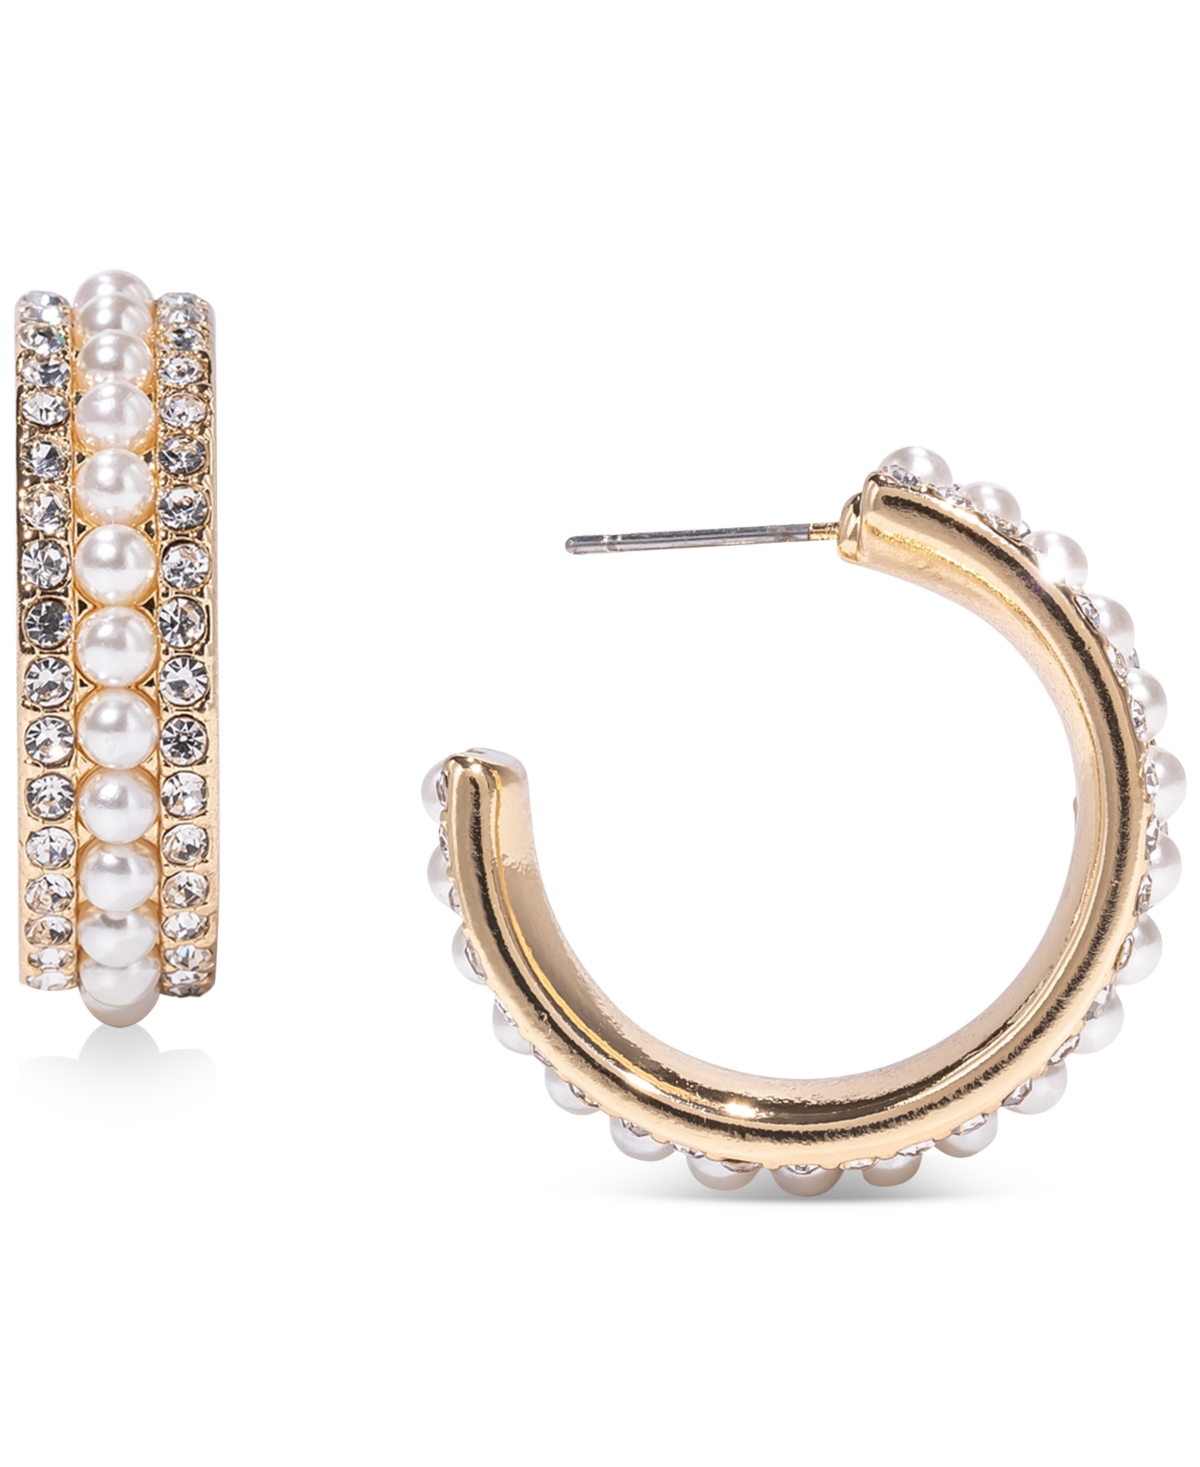 Gold-Tone Medium Pave & Imitation Pearl C-Hoop Earrings, 1.15", Created for Macy's - White